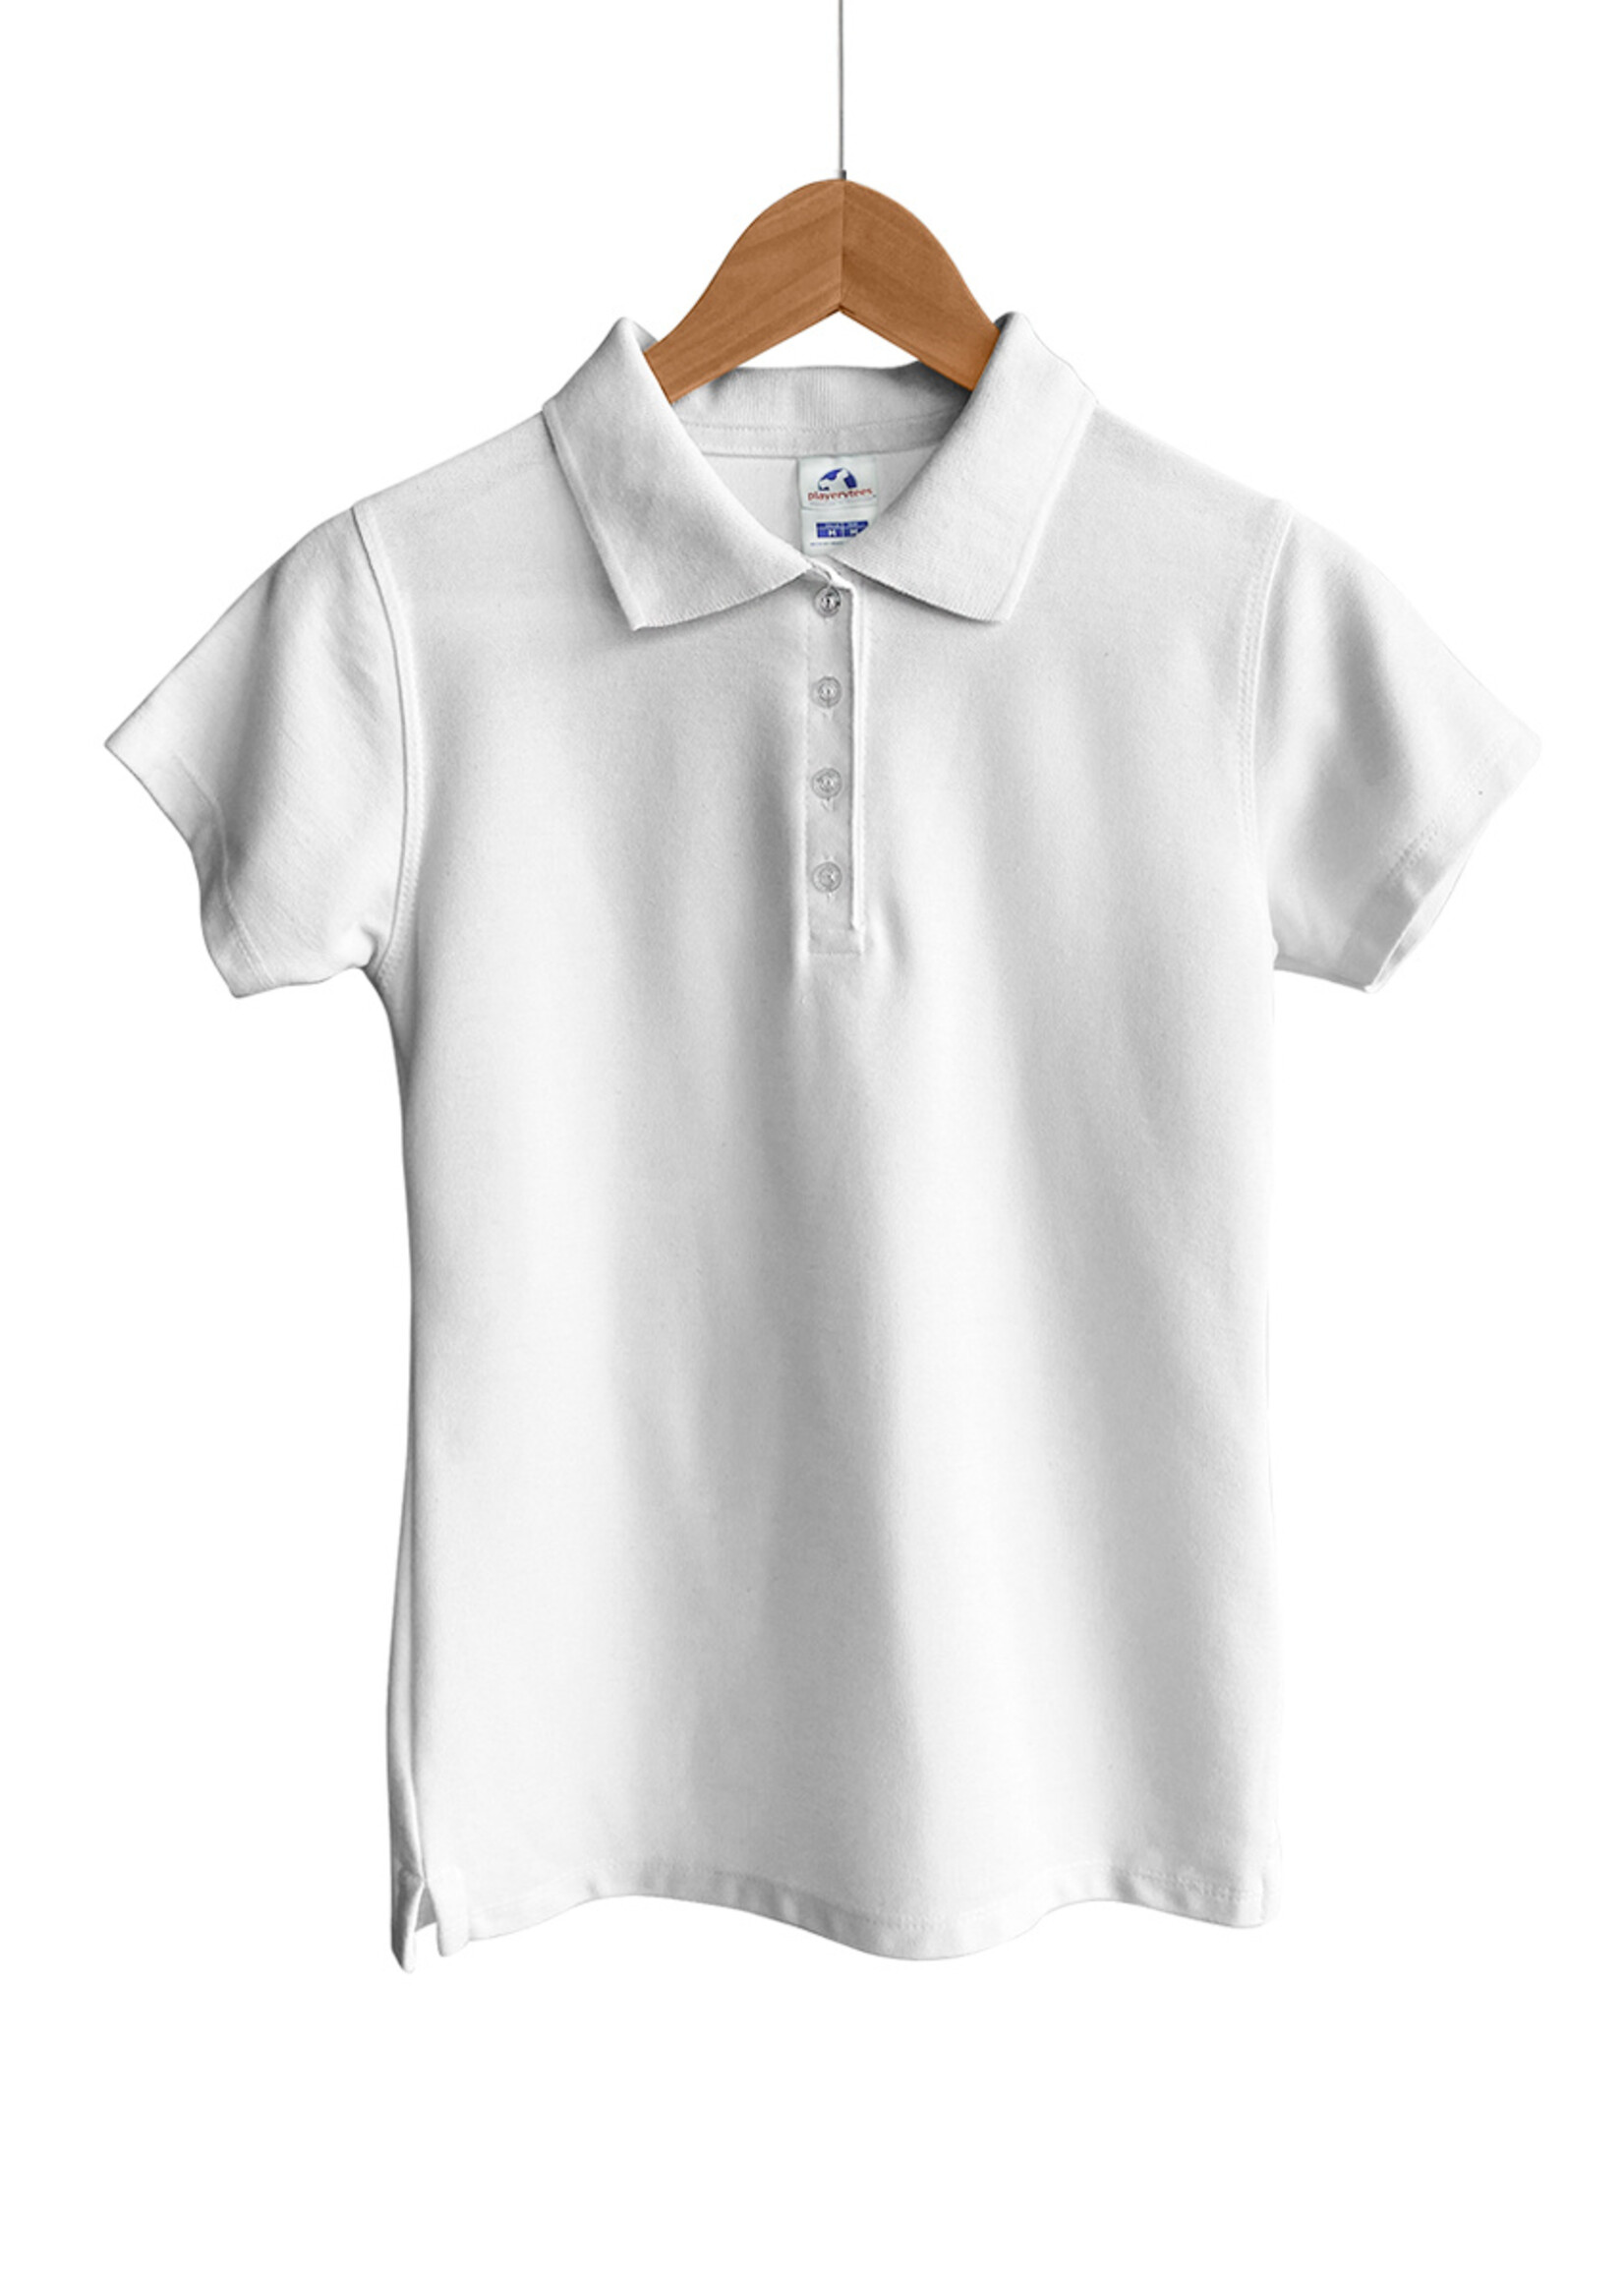 Playerytees STYLE 600D - CARDED POLO 50% COTTON 50% POLYESTER